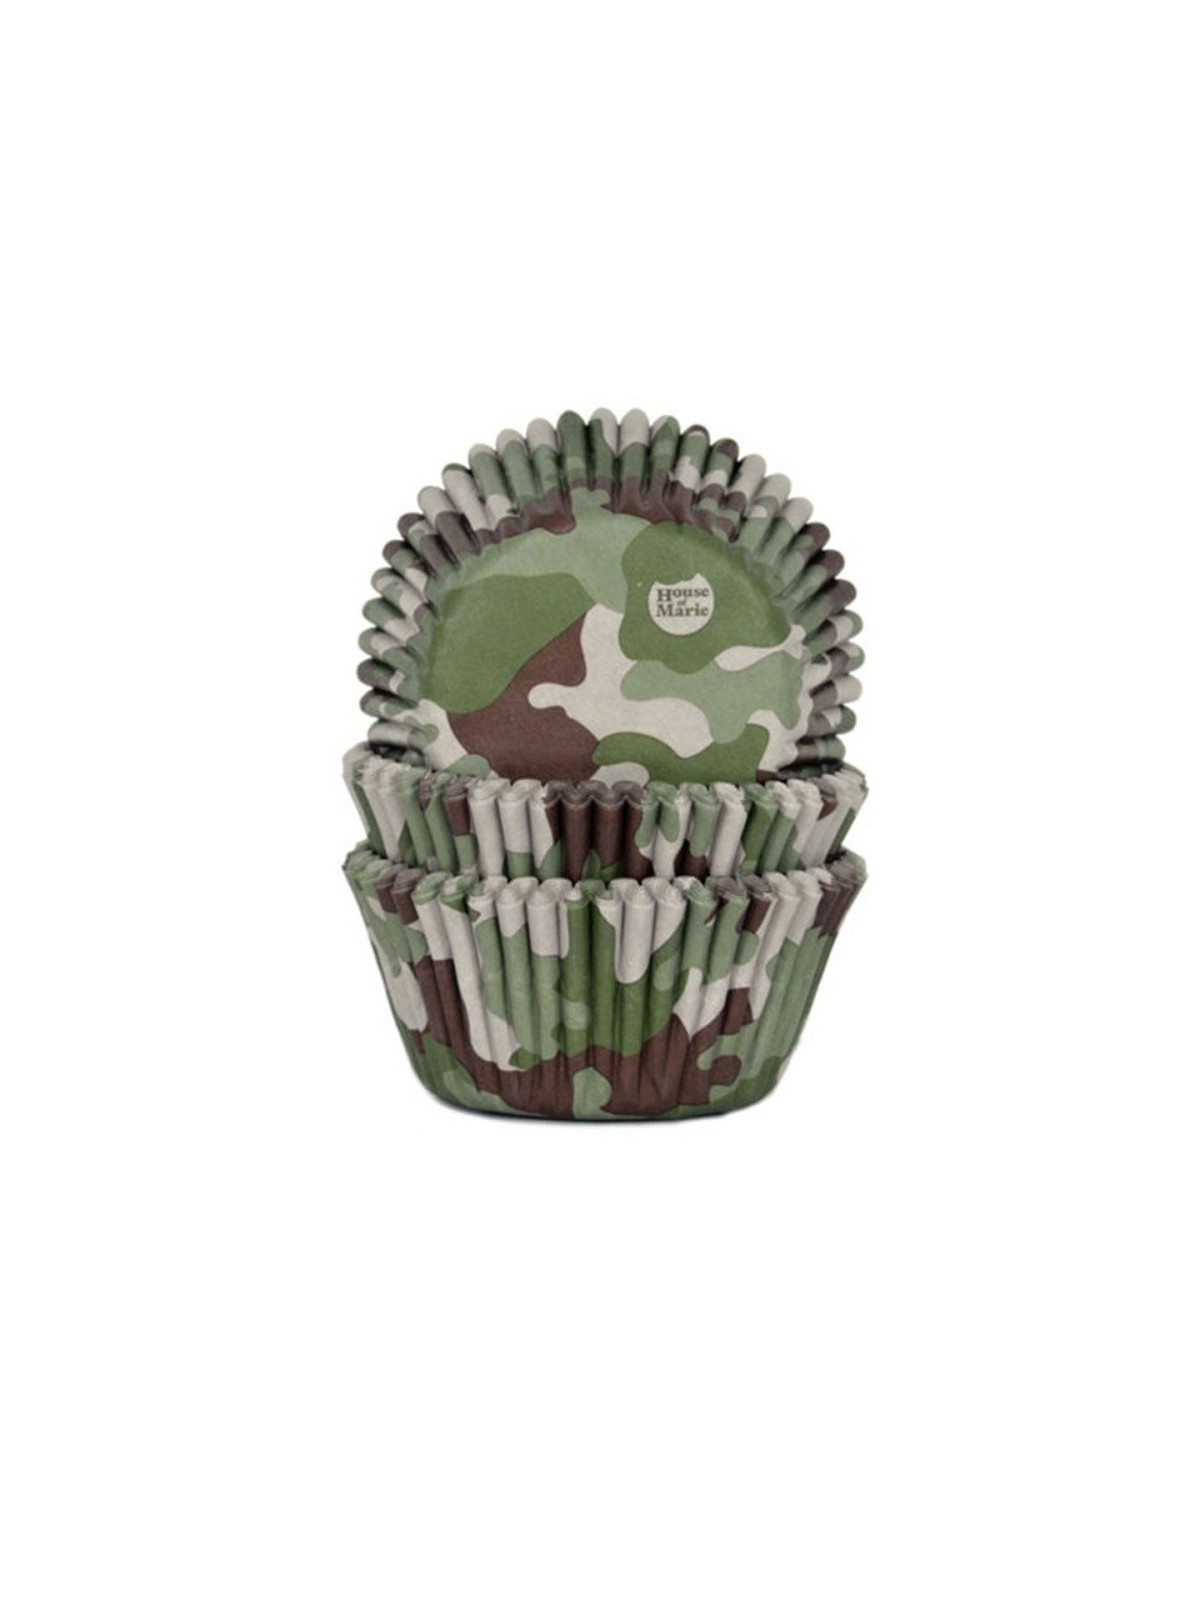 House of Marie mini Baking Cups - Camouflage  50pcs